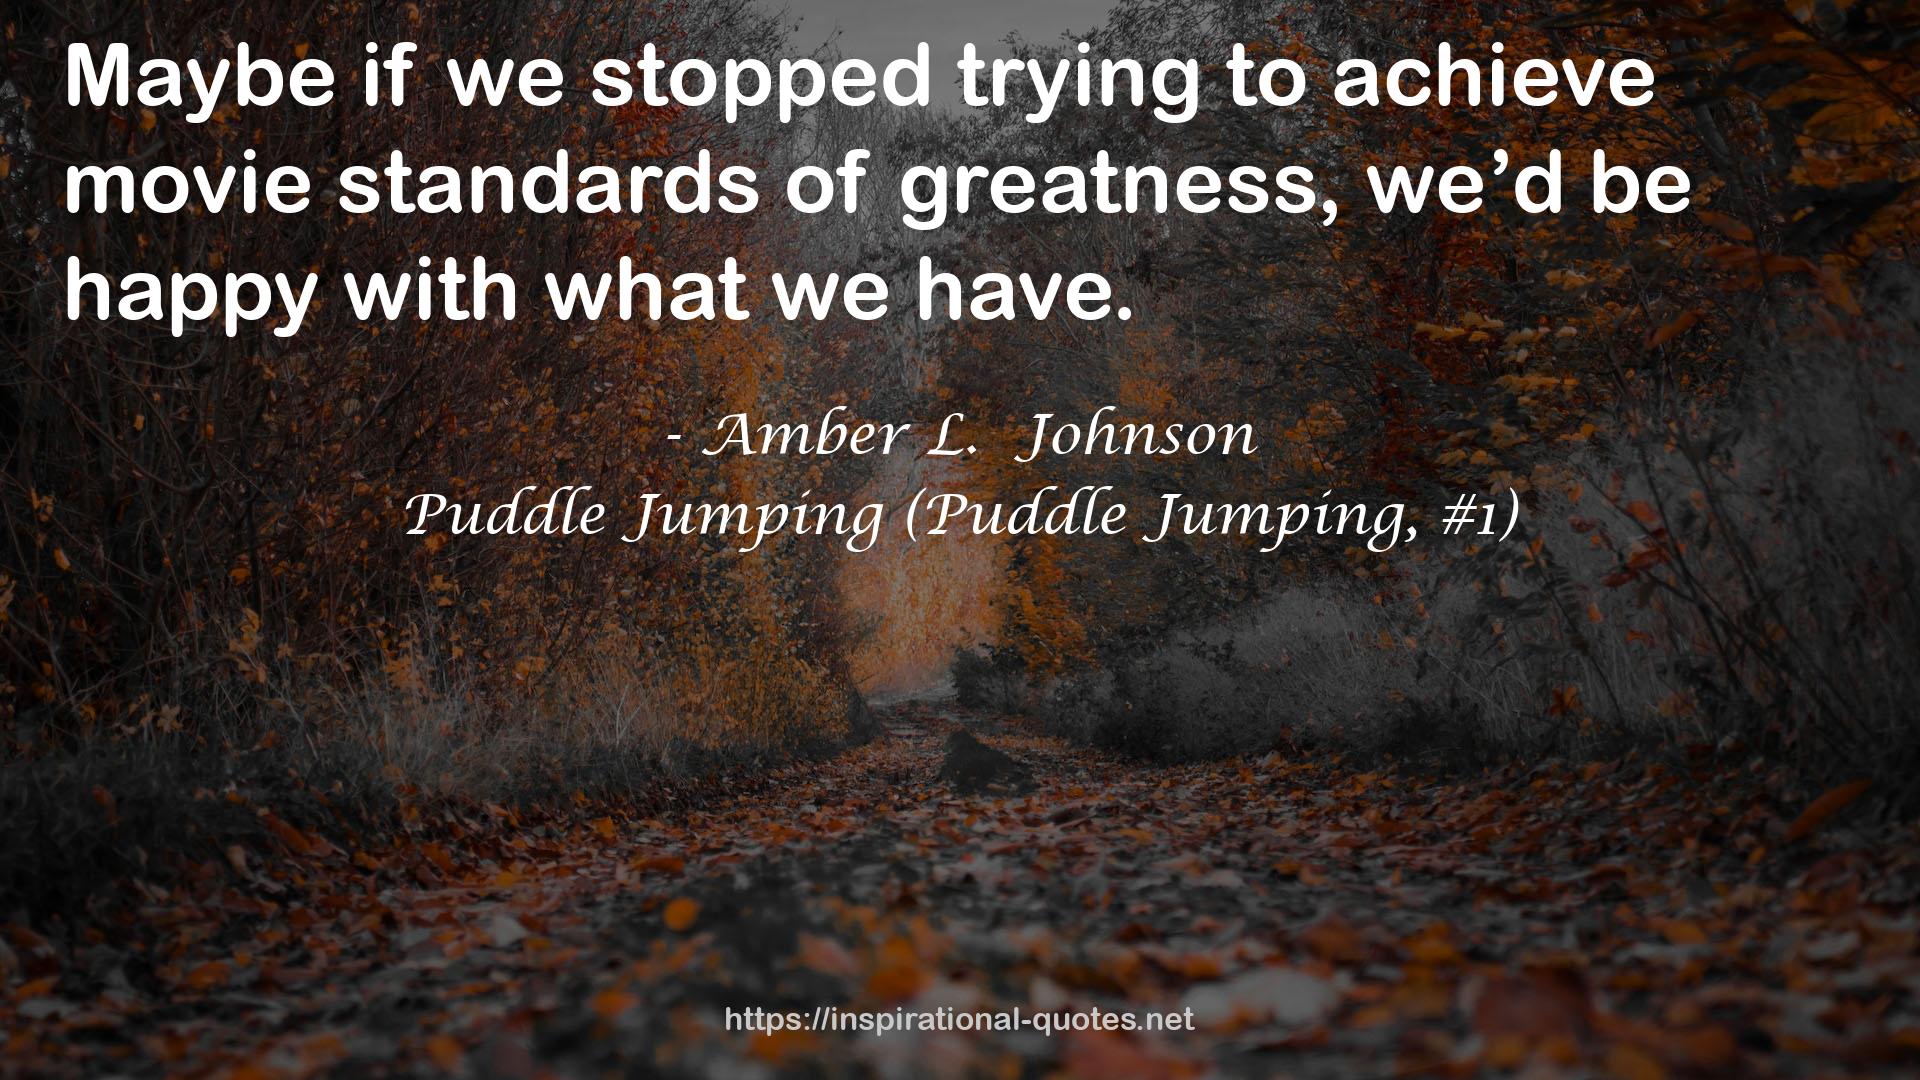 Puddle Jumping (Puddle Jumping, #1) QUOTES